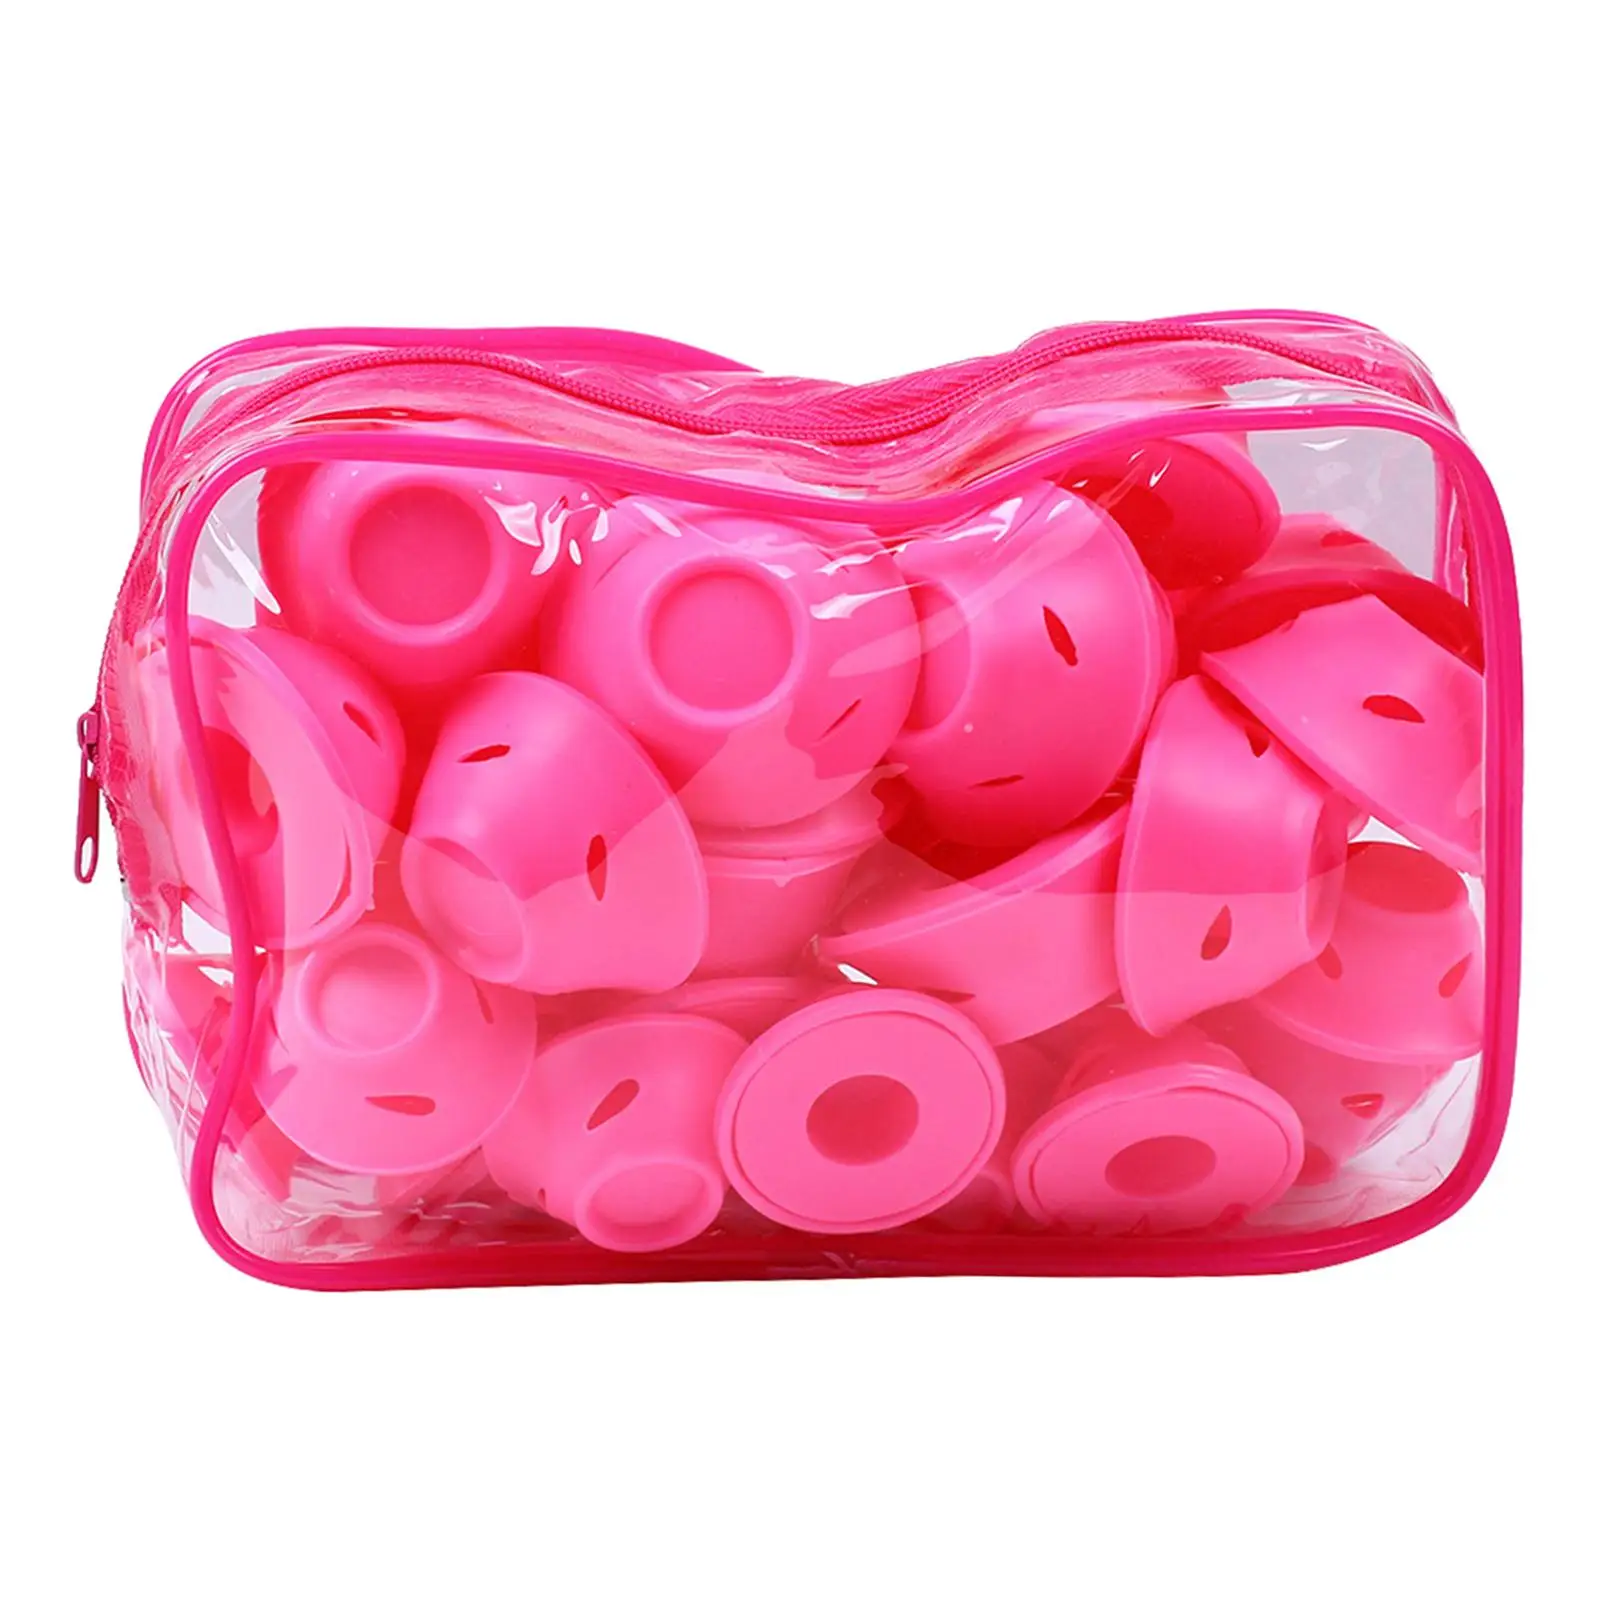 30pcs Roller No Heat Accessories   Tools Removable  Tools for Women Girls Silicone Curling